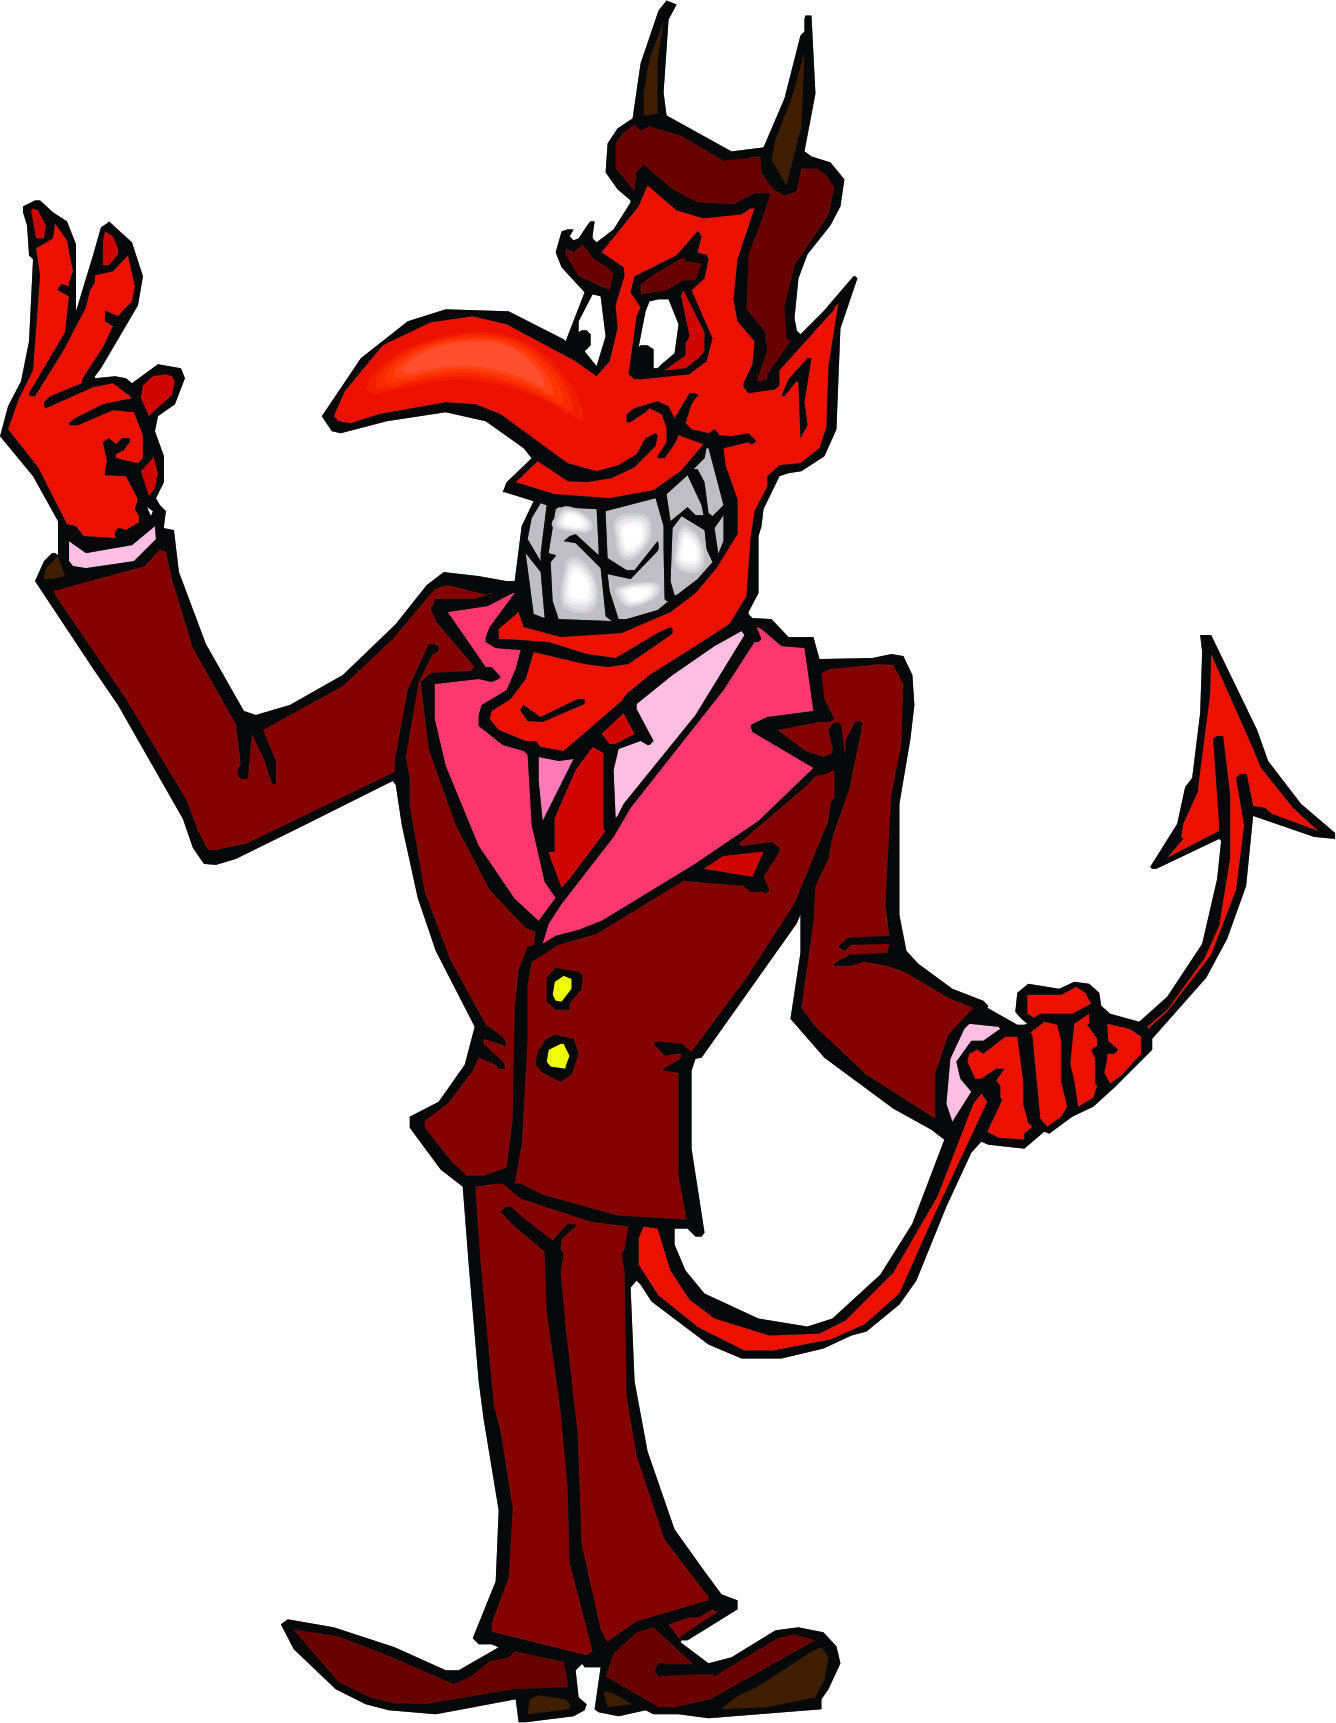 Free Cartoon Devil Pictures, Download Free Cartoon Devil Pictures png image...